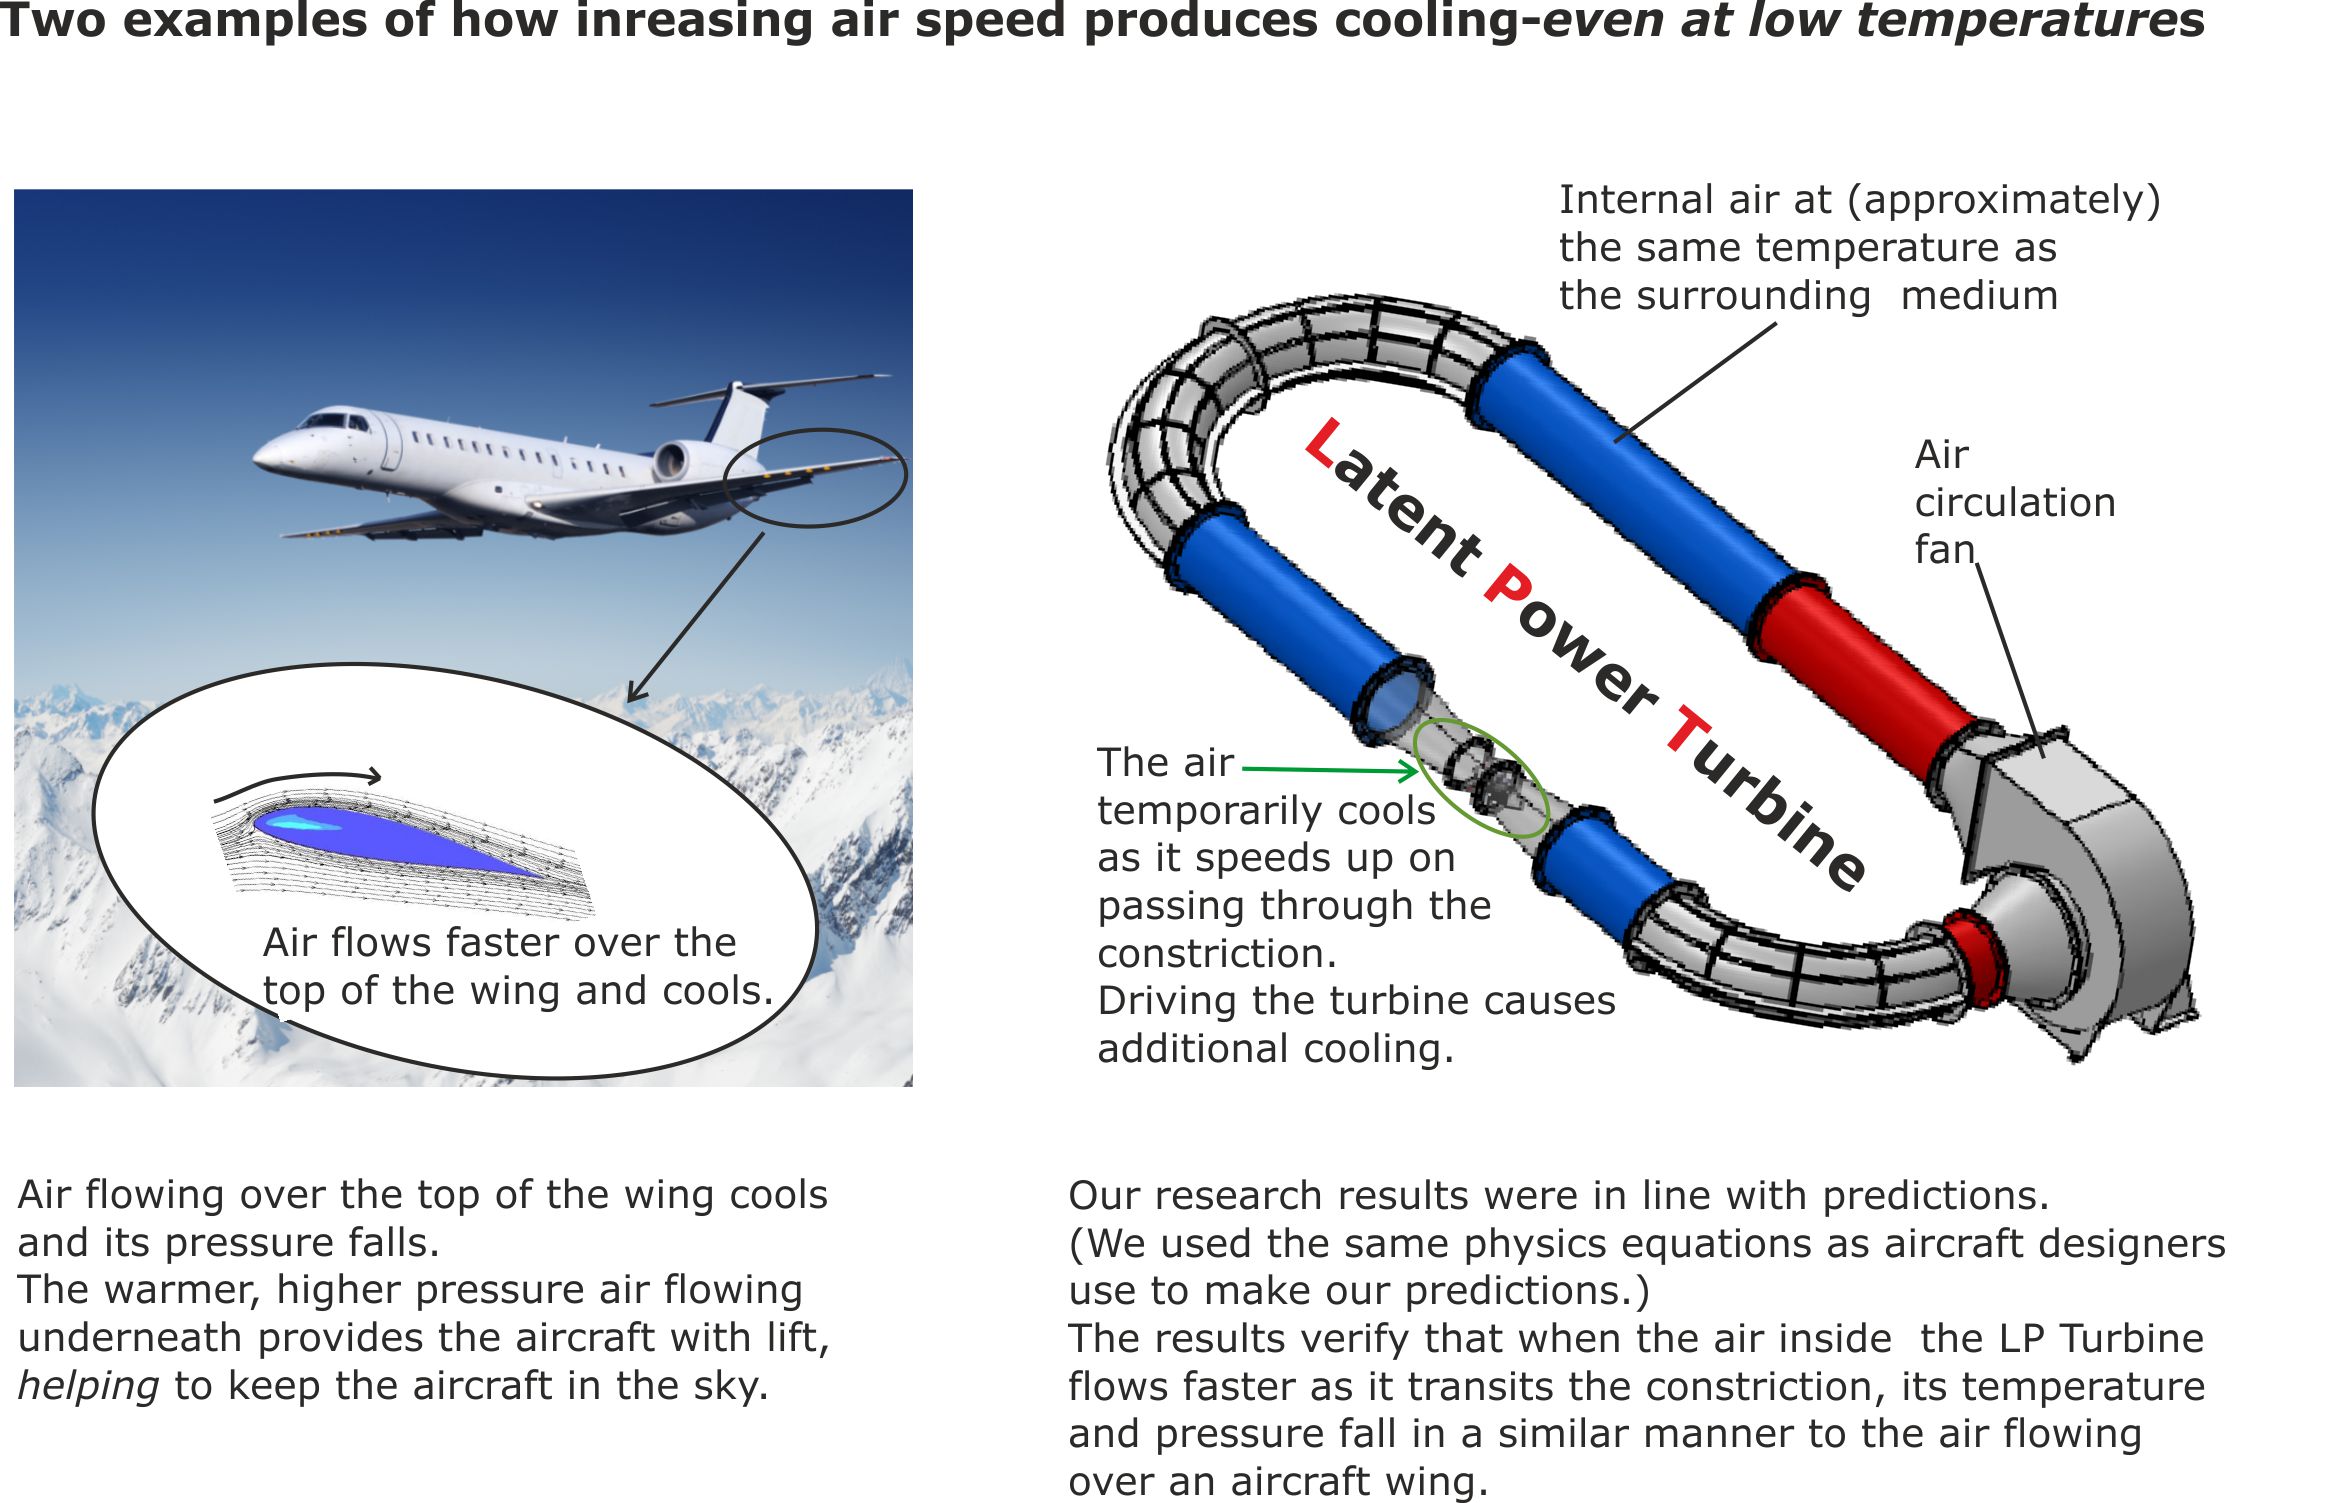 Uncreasing air sped produces cooling